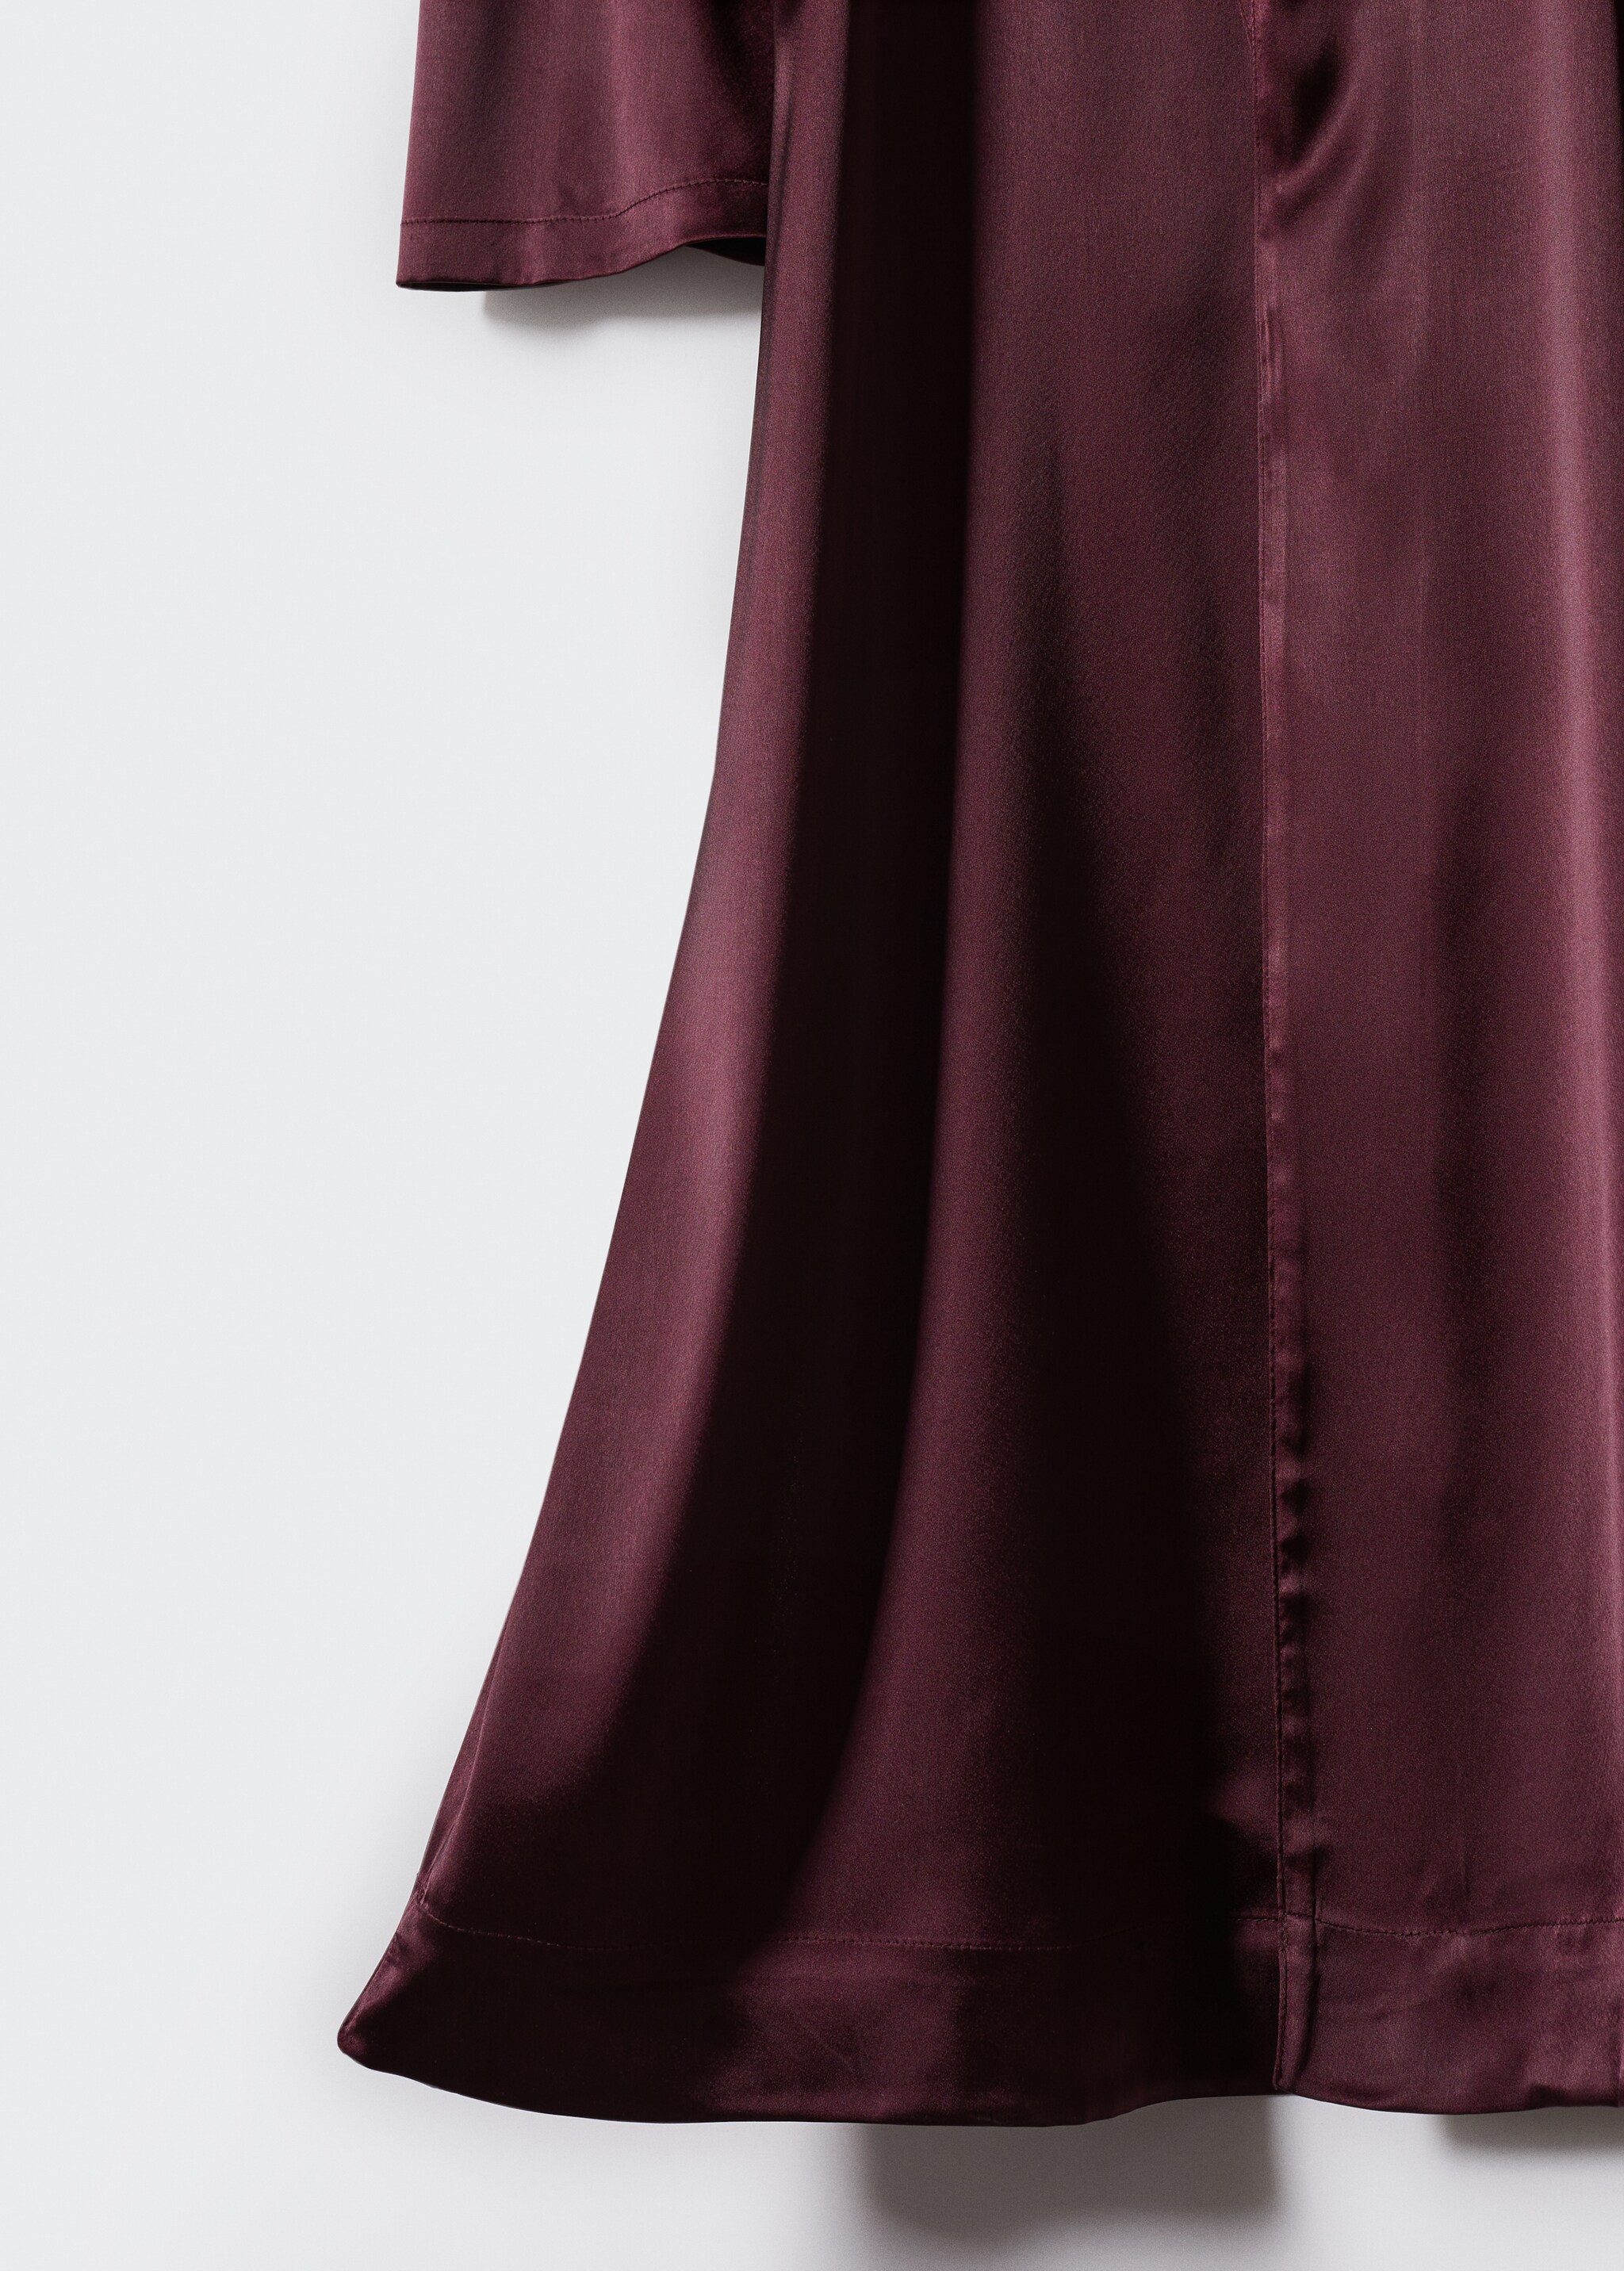 Satin-finish robe with belt - Details of the article 8